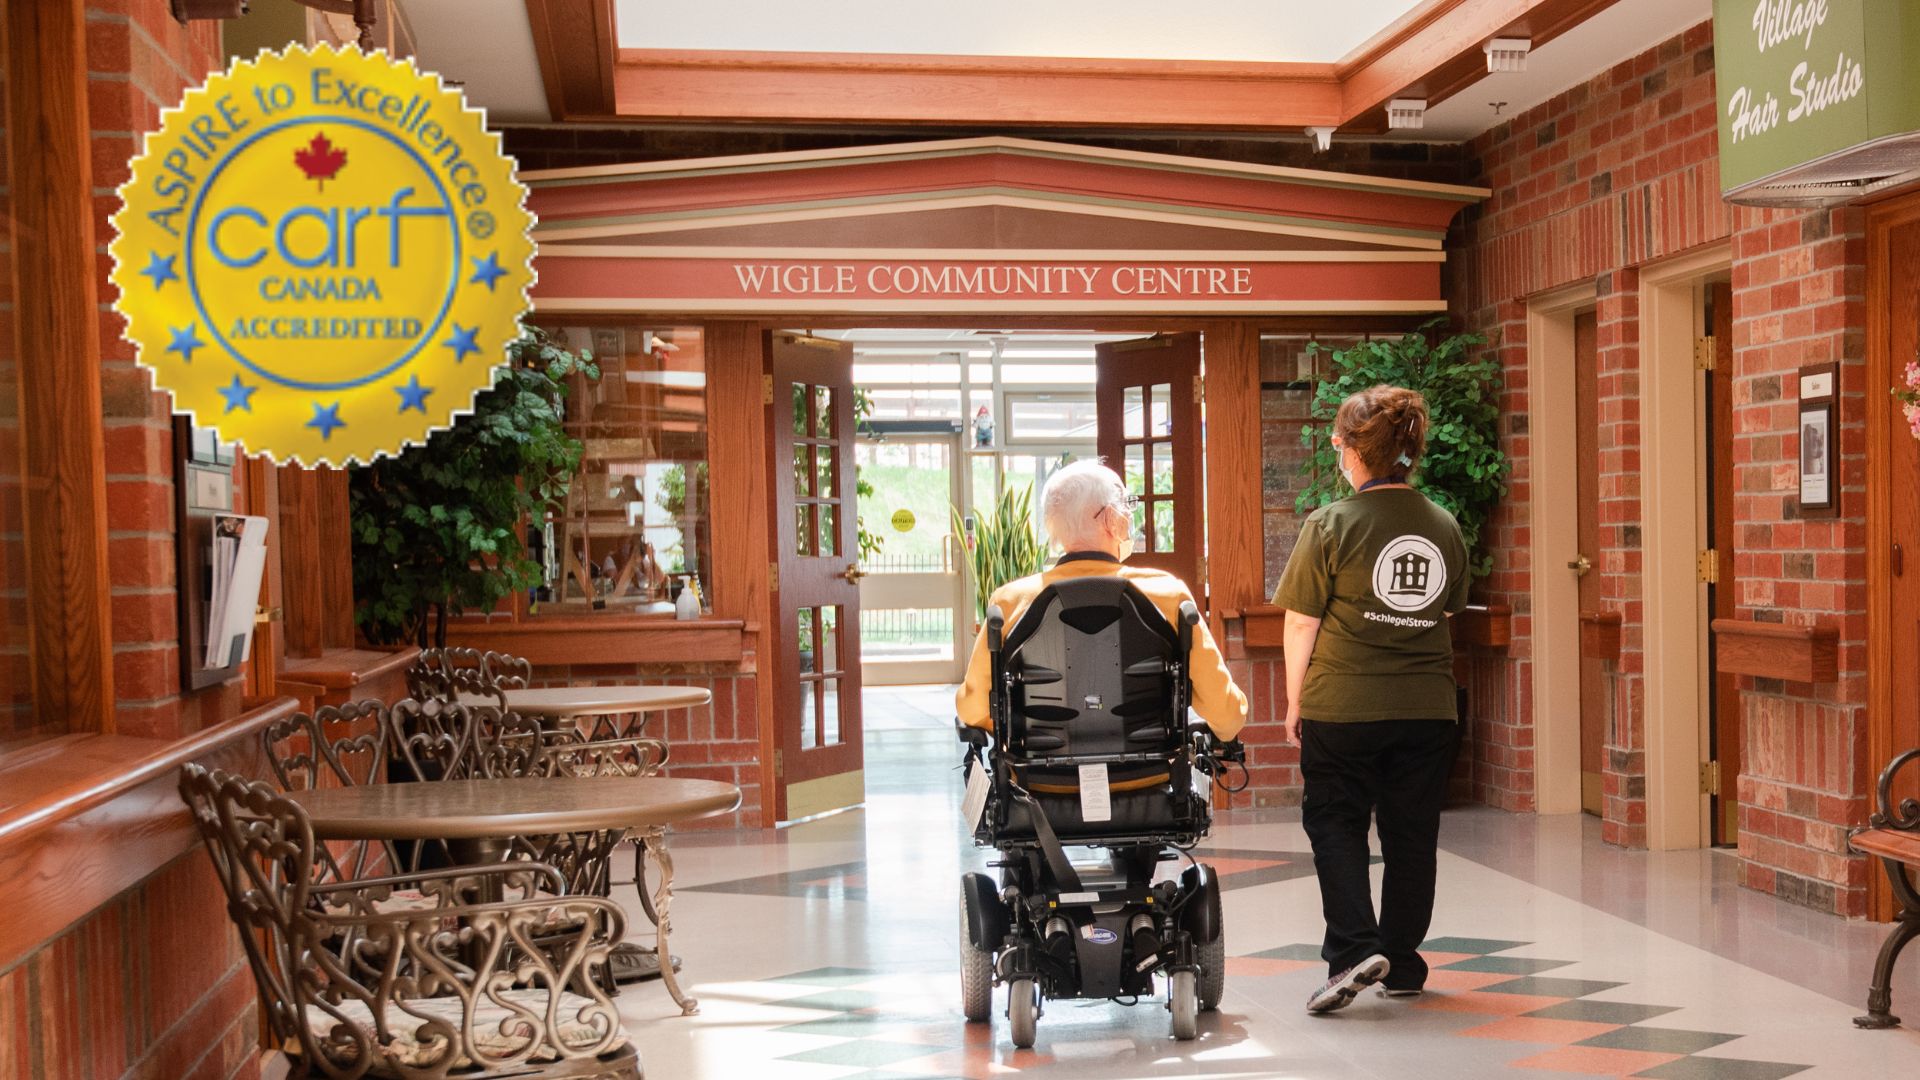 Team member walking with resident in a motorized wheelchair on main street - CARF Accreditation Gold Seal logo attached